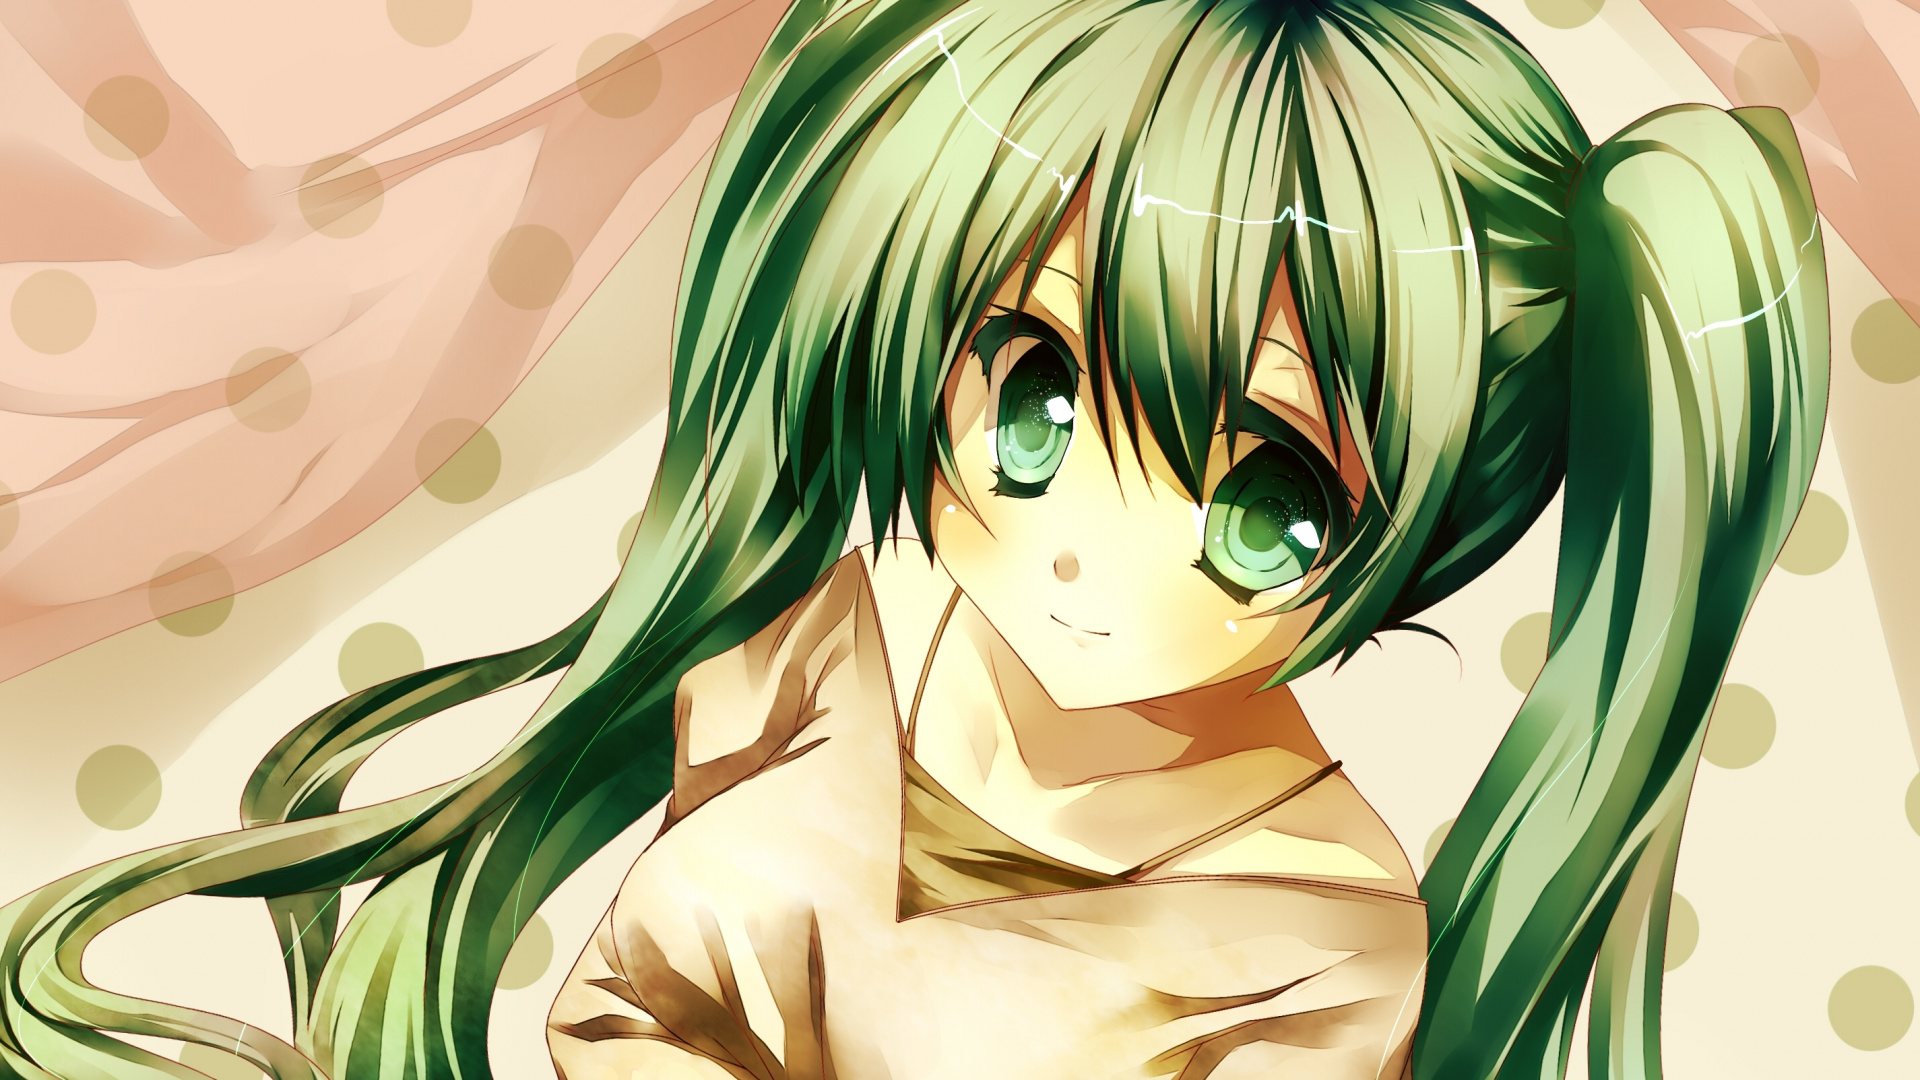 Personnage D'anime Masculin Aux Cheveux Verts. Wallpaper in 1920x1080 Resolution